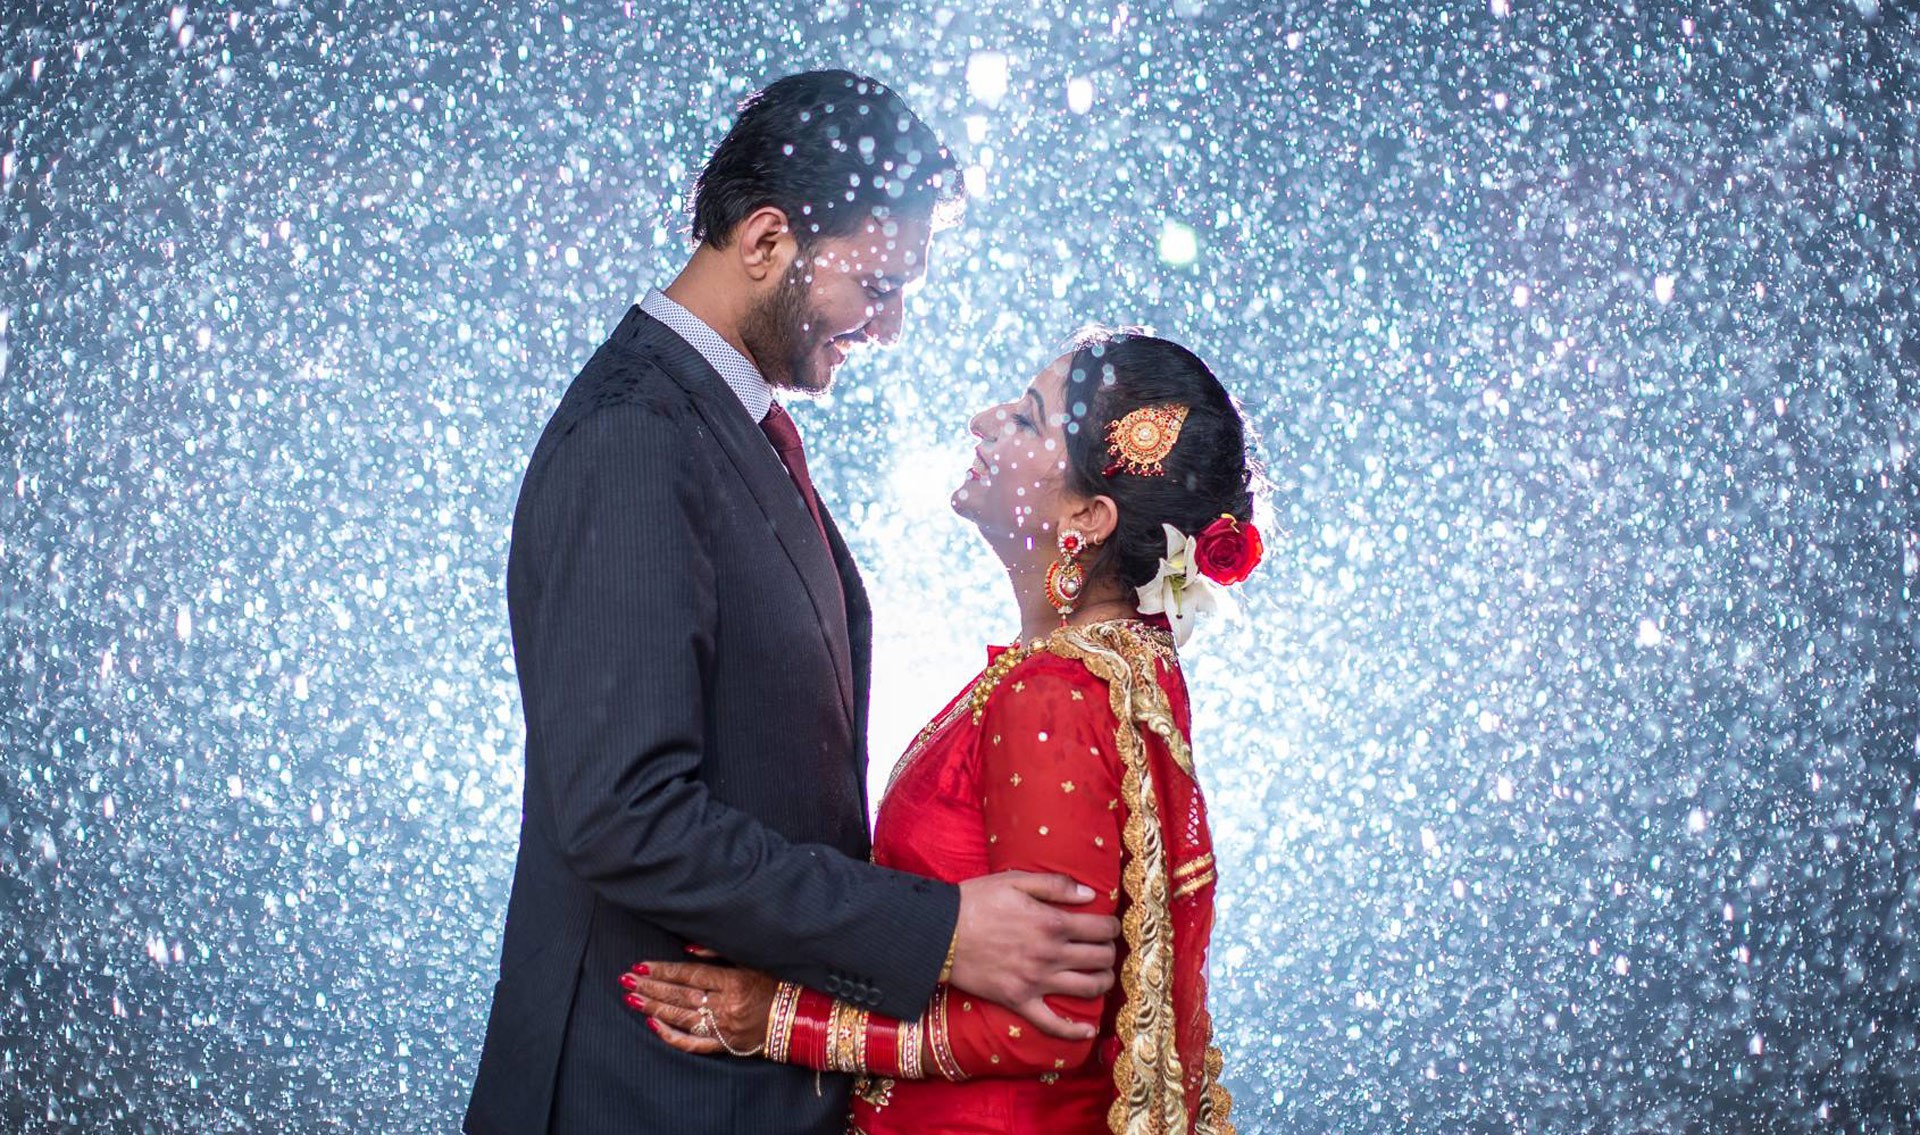 cute punjabi couples wallpapers,photograph,ceremony,event,wedding,formal wear